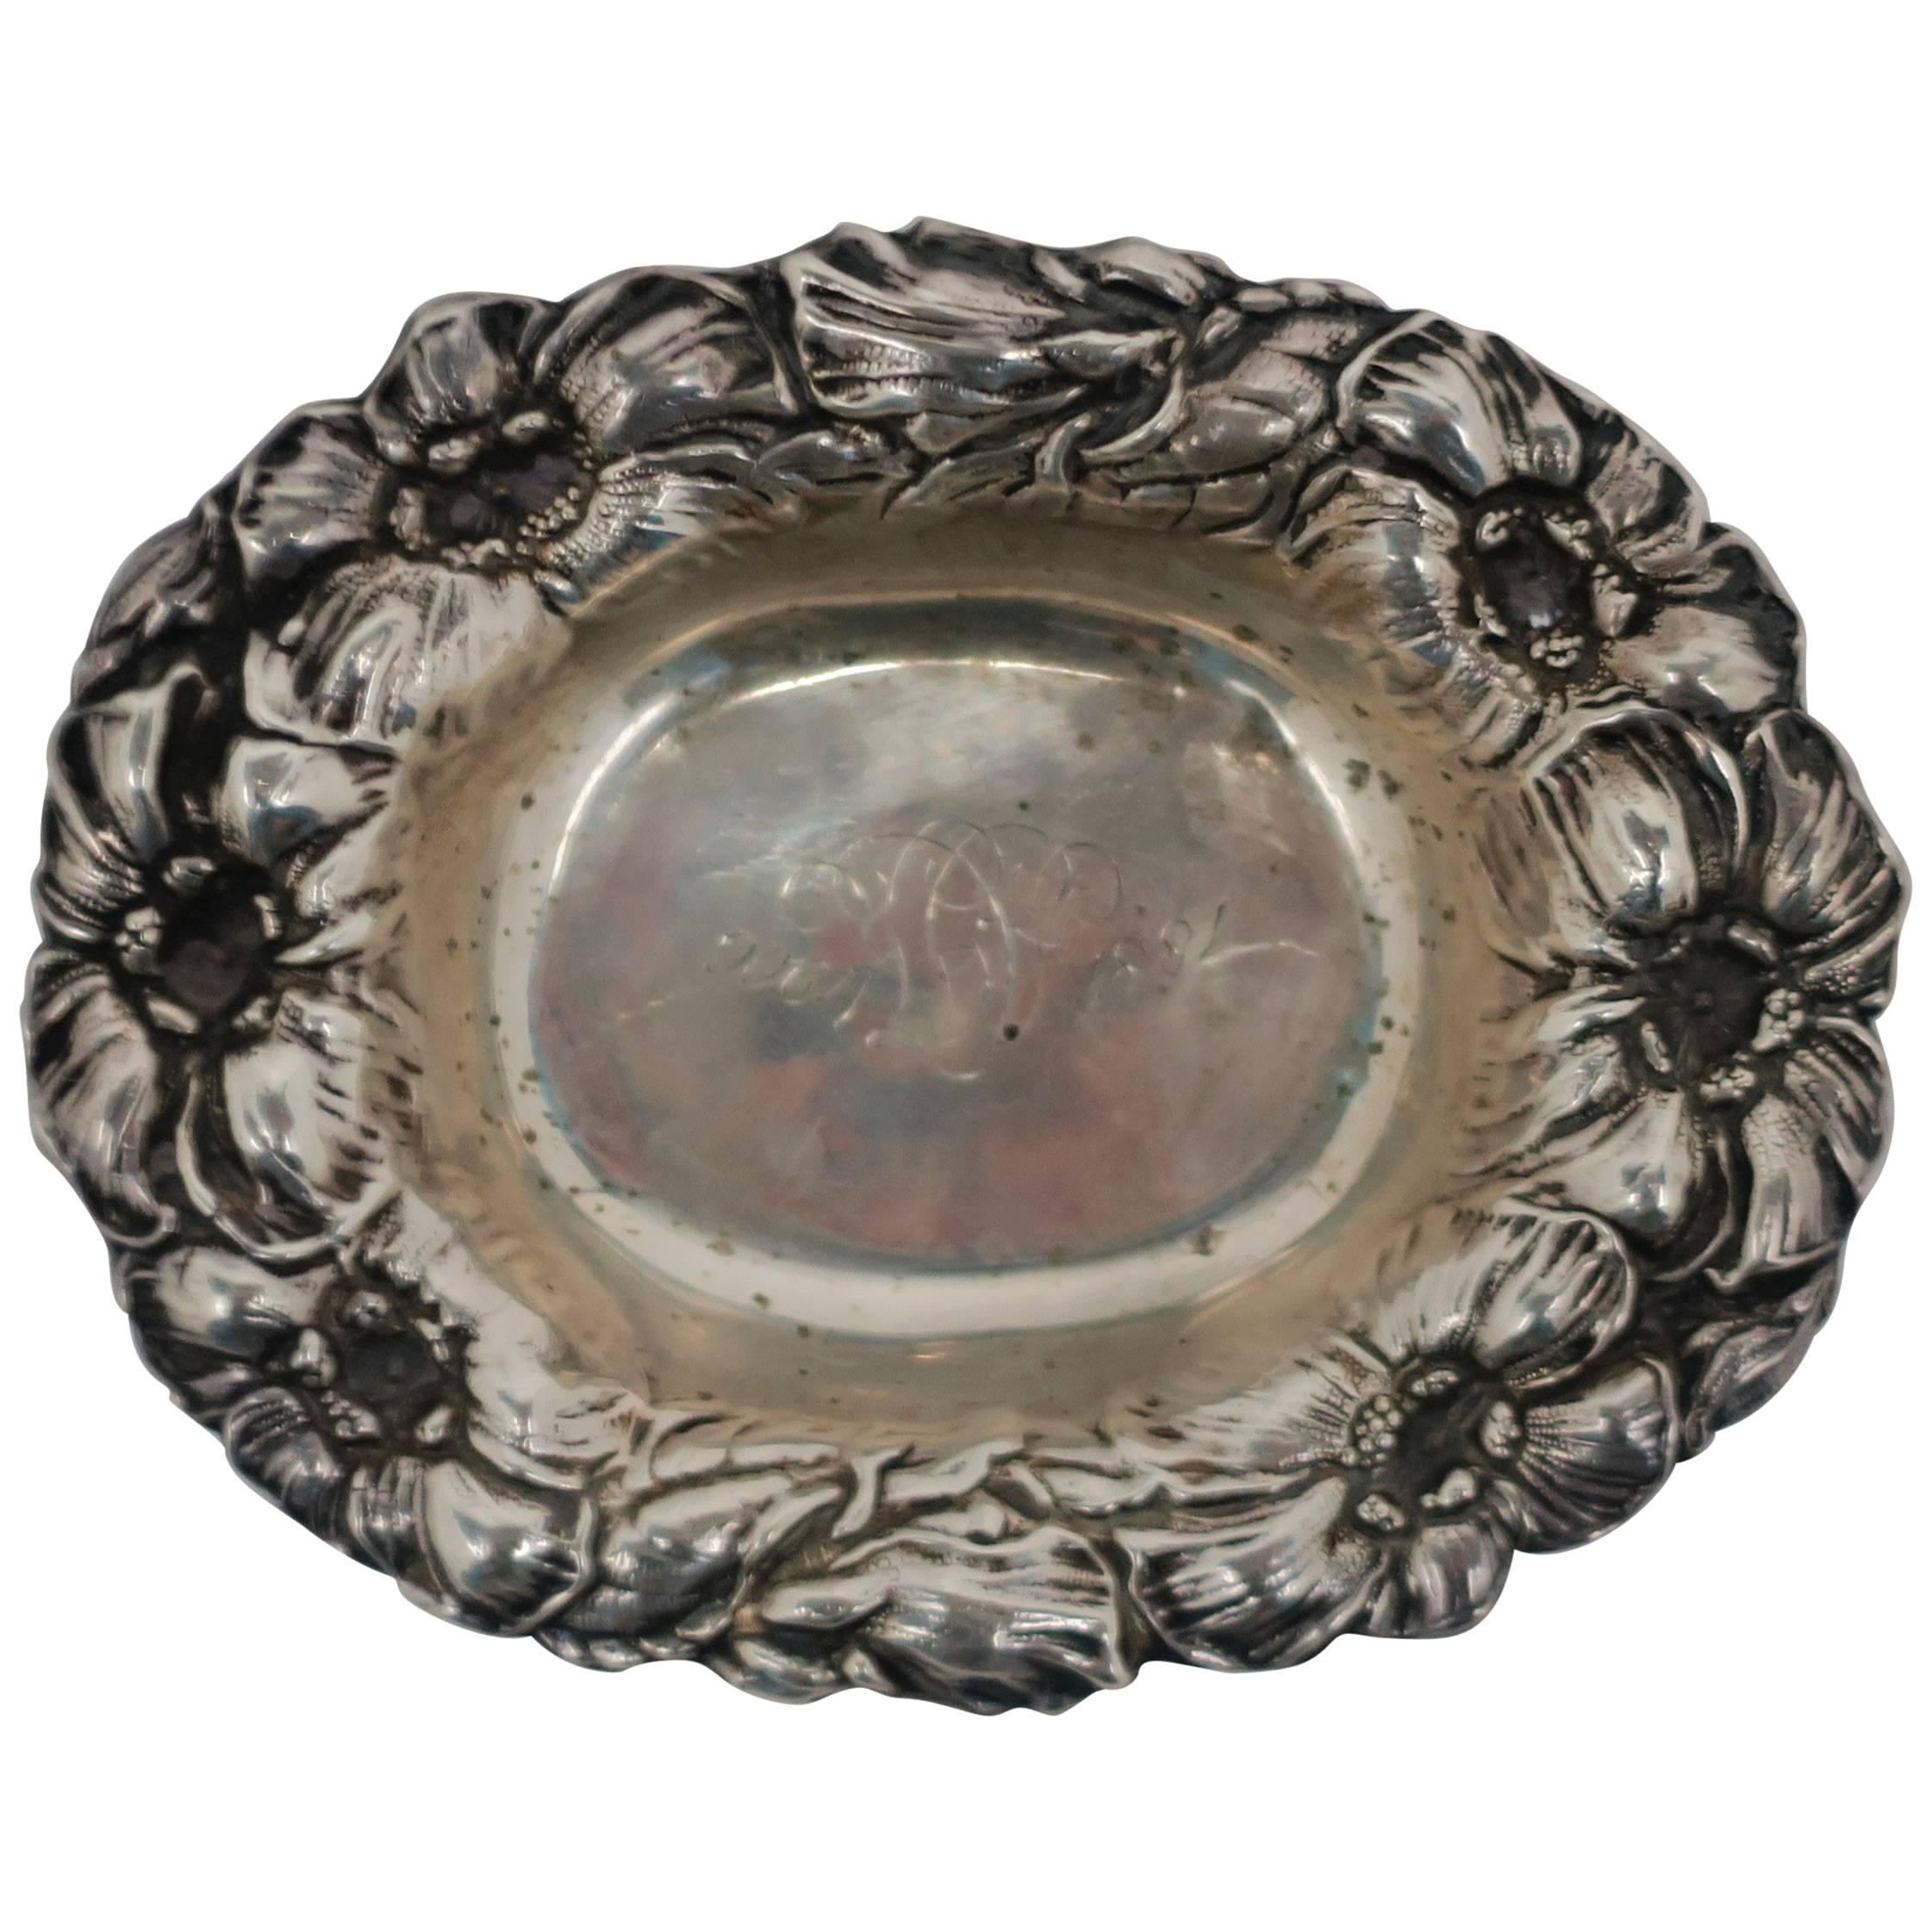 Antique Sterling Silver Jewelry Dish